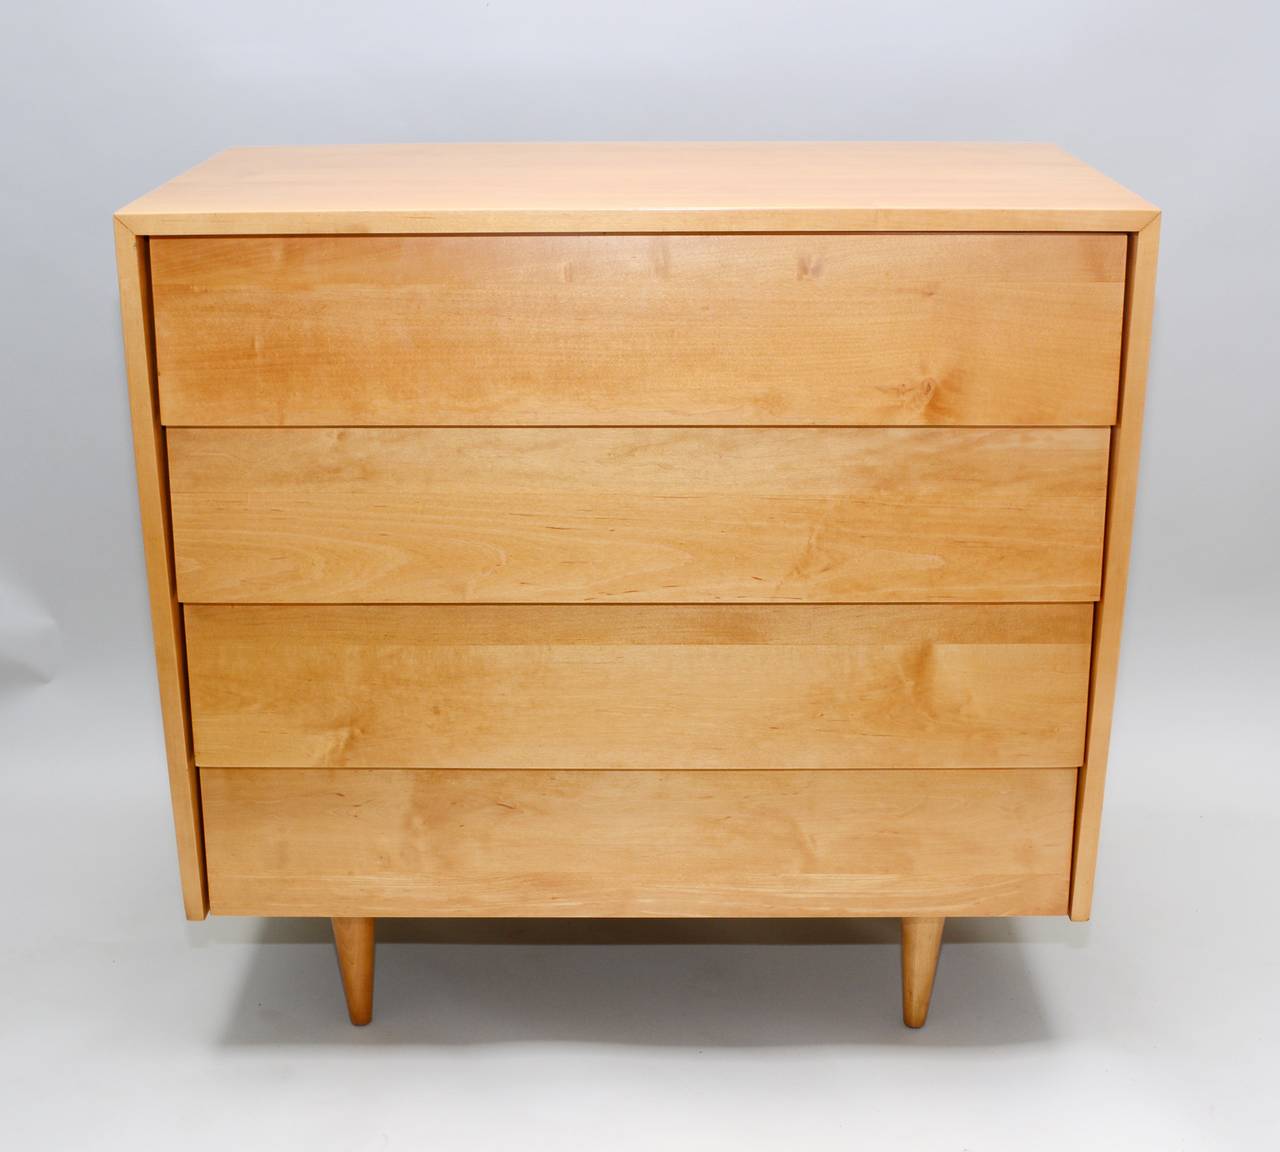 Early Knoll chest of drawers designed by Florence Knoll in 1947. This is solid maple. The top drawer is divided and the lower three are open. The chest has been refinished.